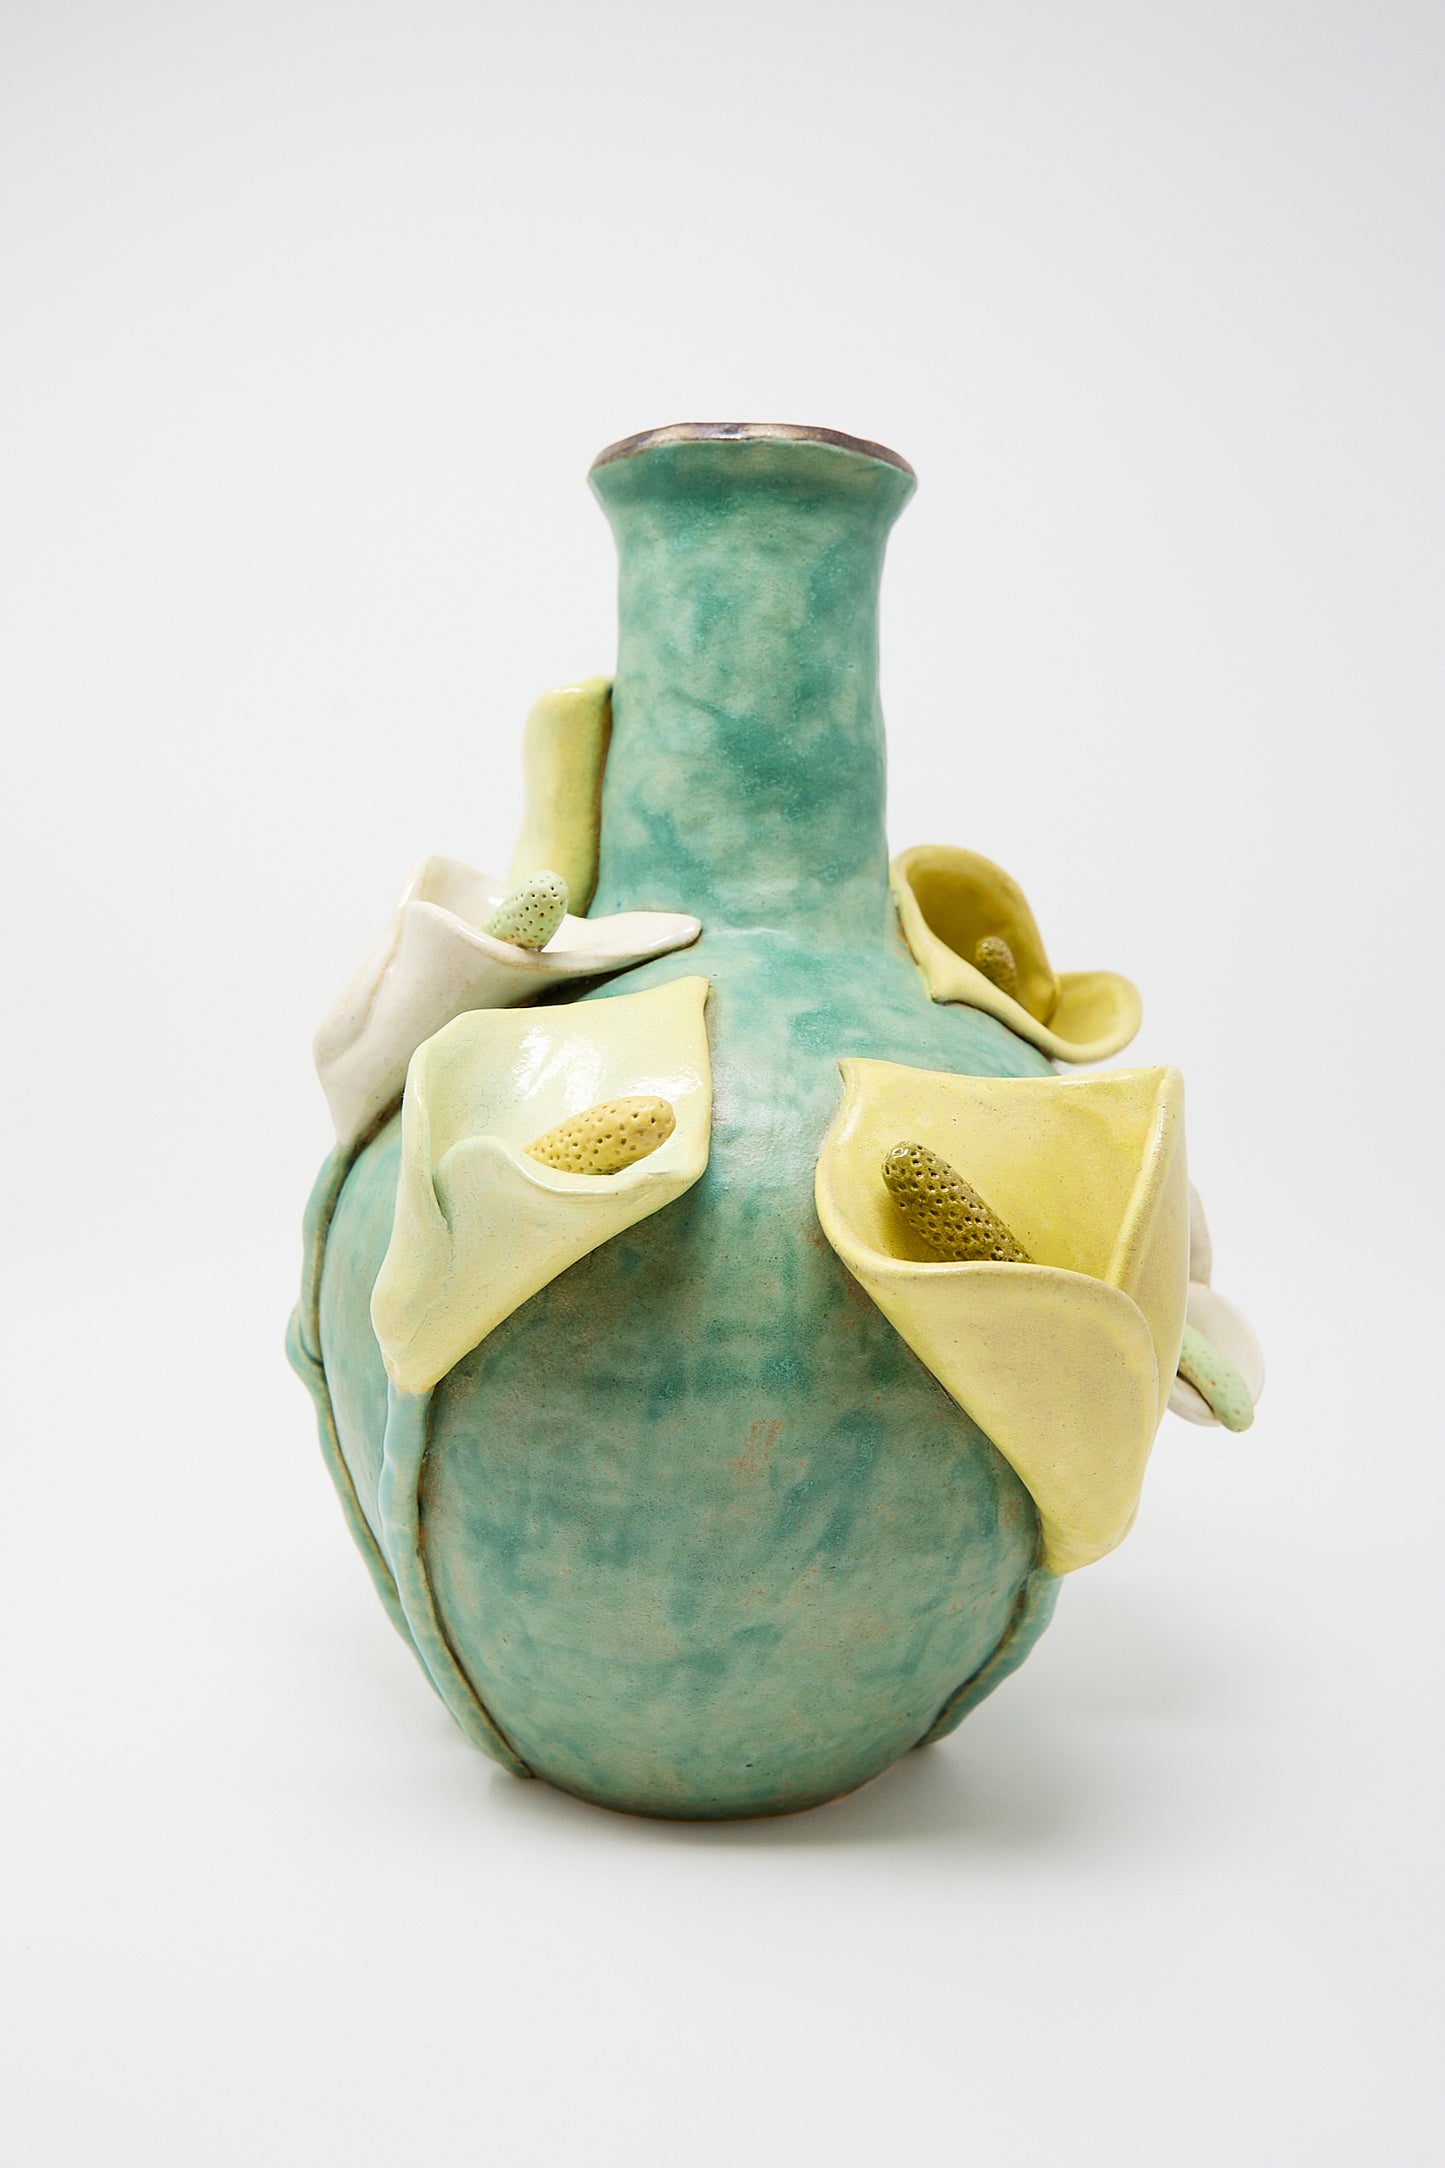 Pearce Williams Calla Vase with a turquoise glaze and decorative, pale yellow calla lilies attached to its surface.